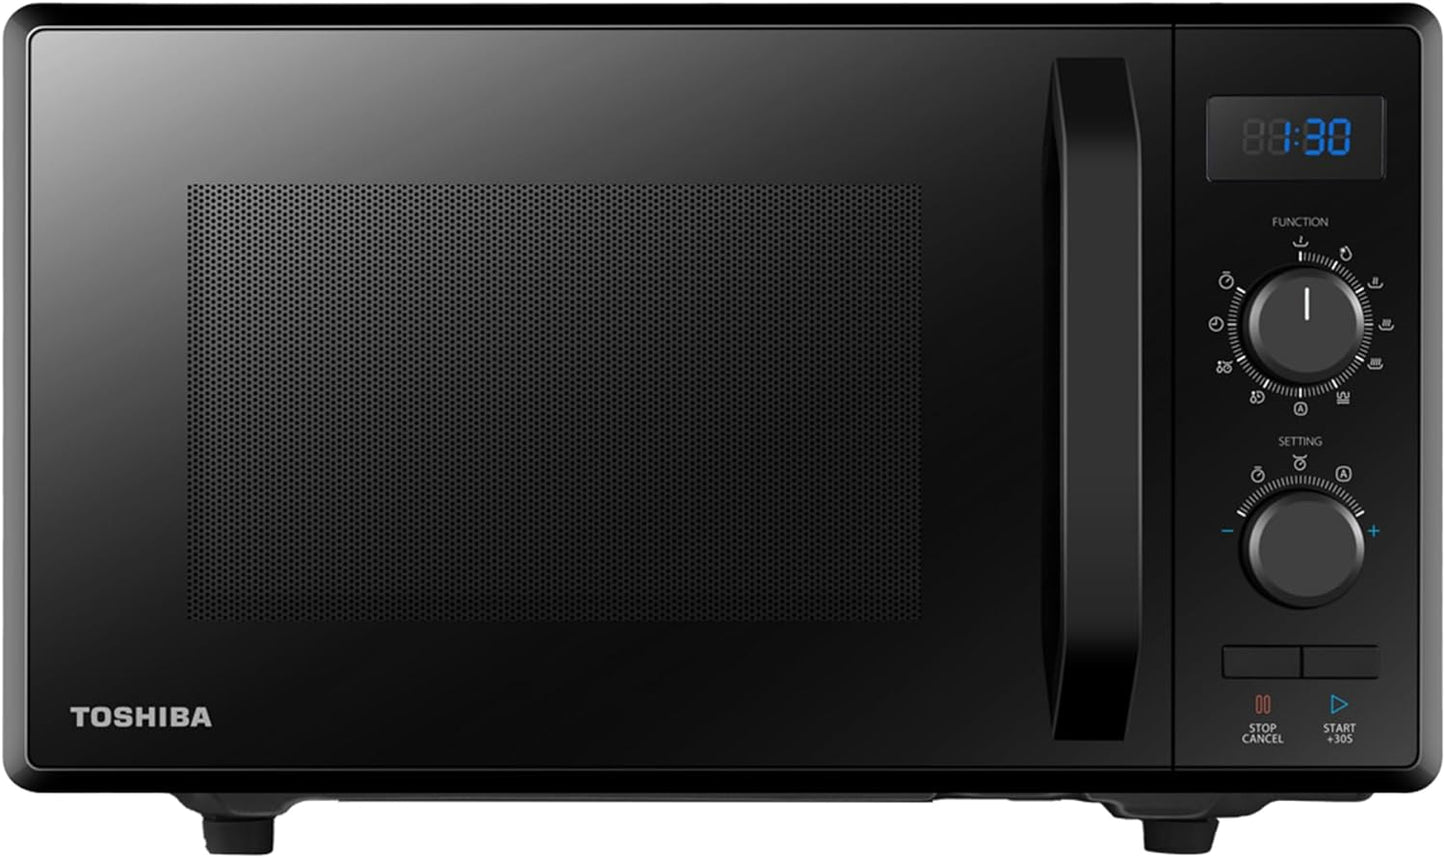 Toshiba 900 w 23 L Microwave Oven with 1050 w Crispy Grill, Energy Saving Eco Function, 8 Auto Menus, 5 Power Levels and Position Memory Turntable - Black - MW2-AG23PF(BK)